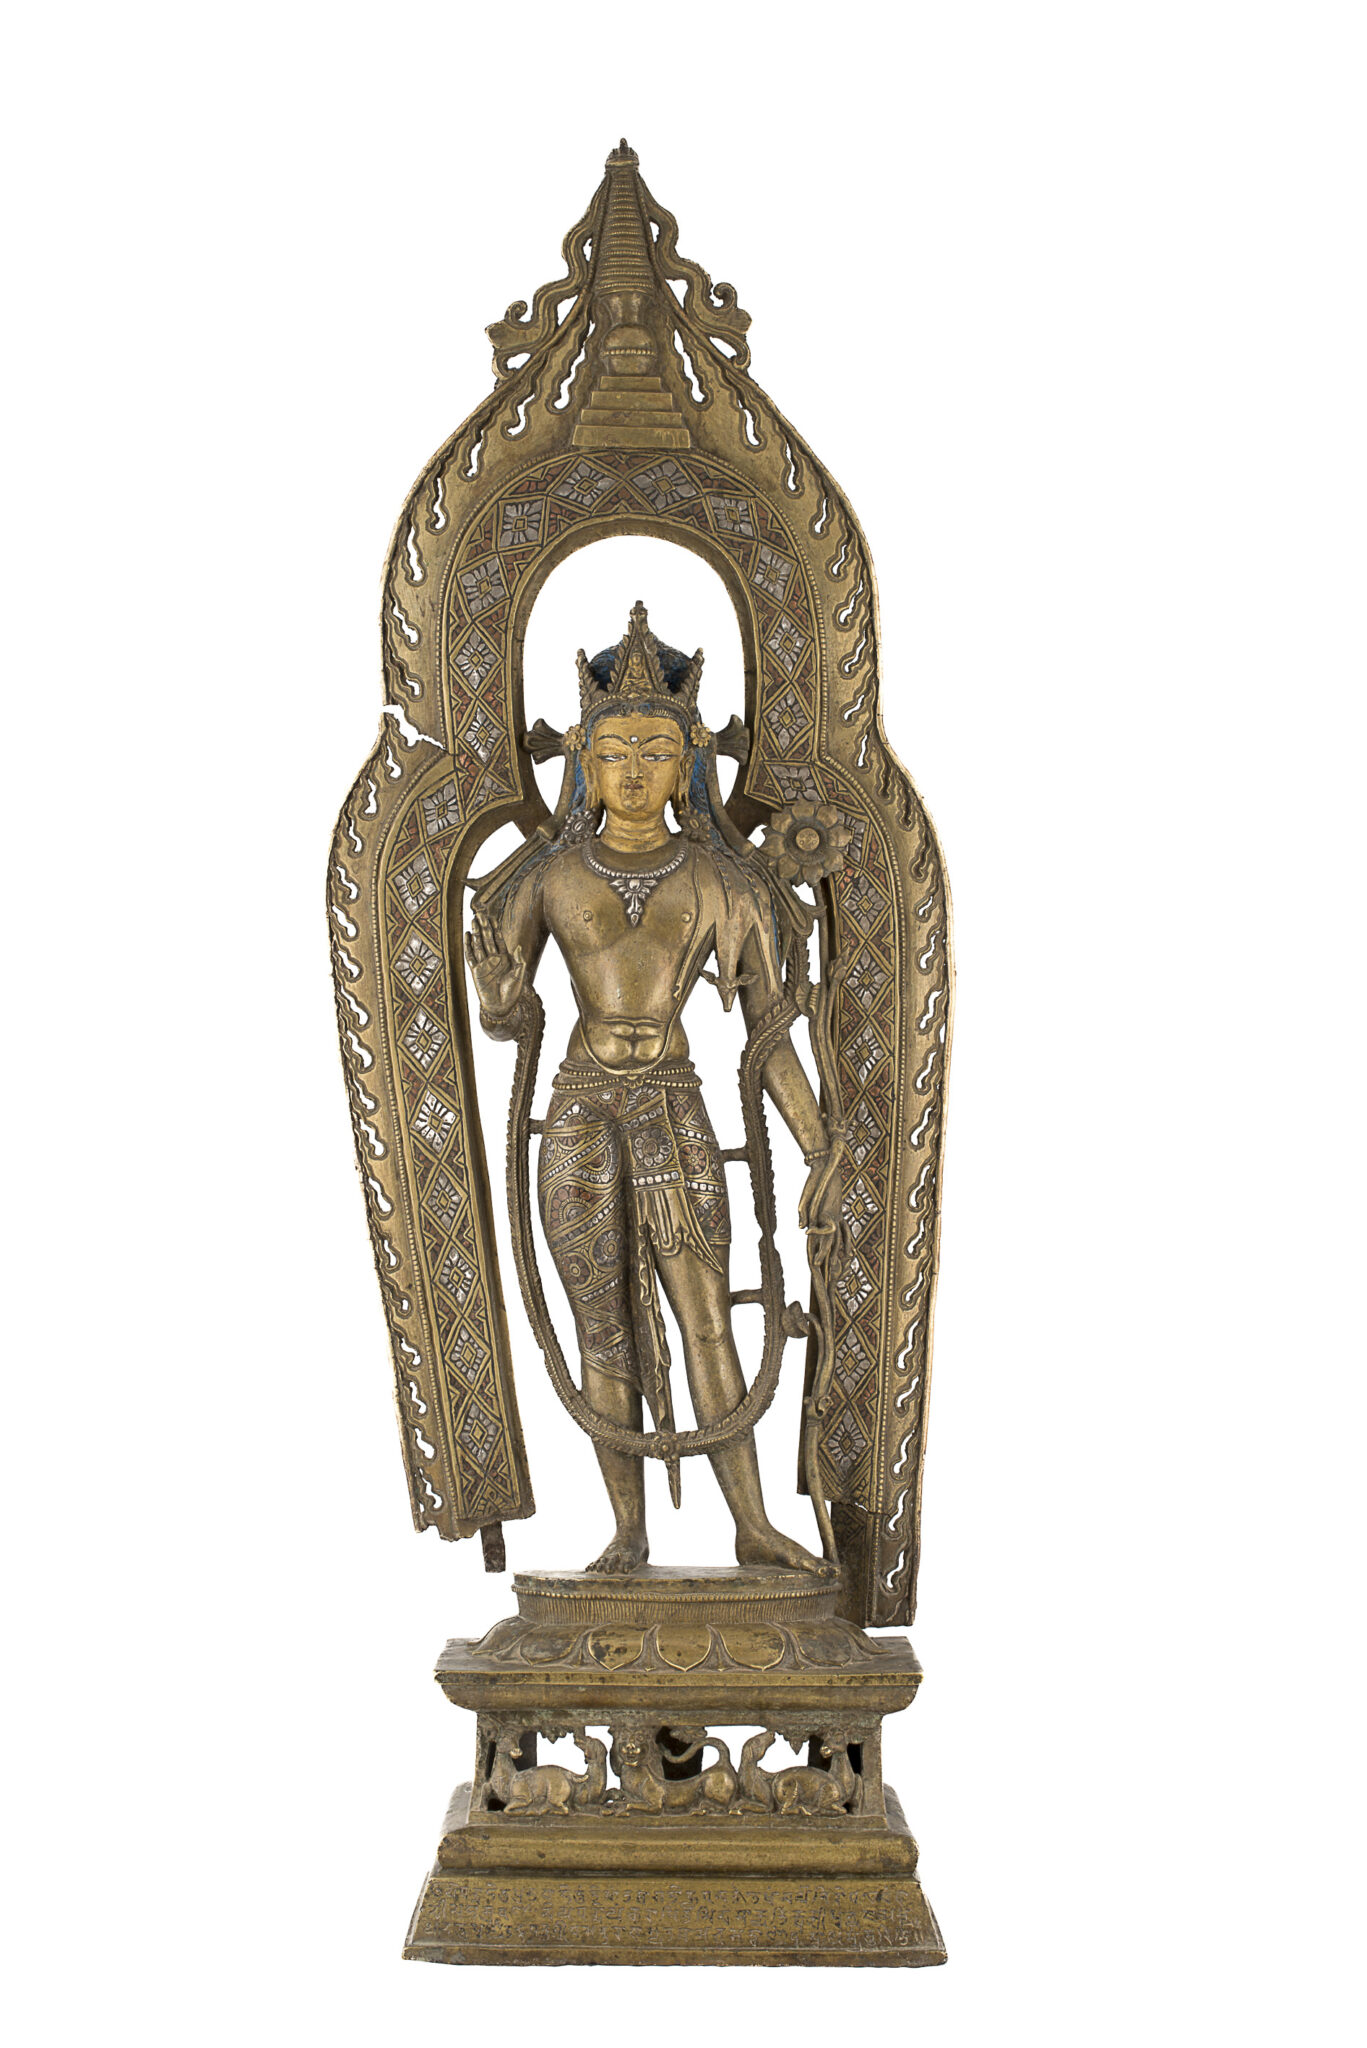 Yellow brass statue of Bodhisattva holding blossom and standing before patterned, open nimbus topped with stupa